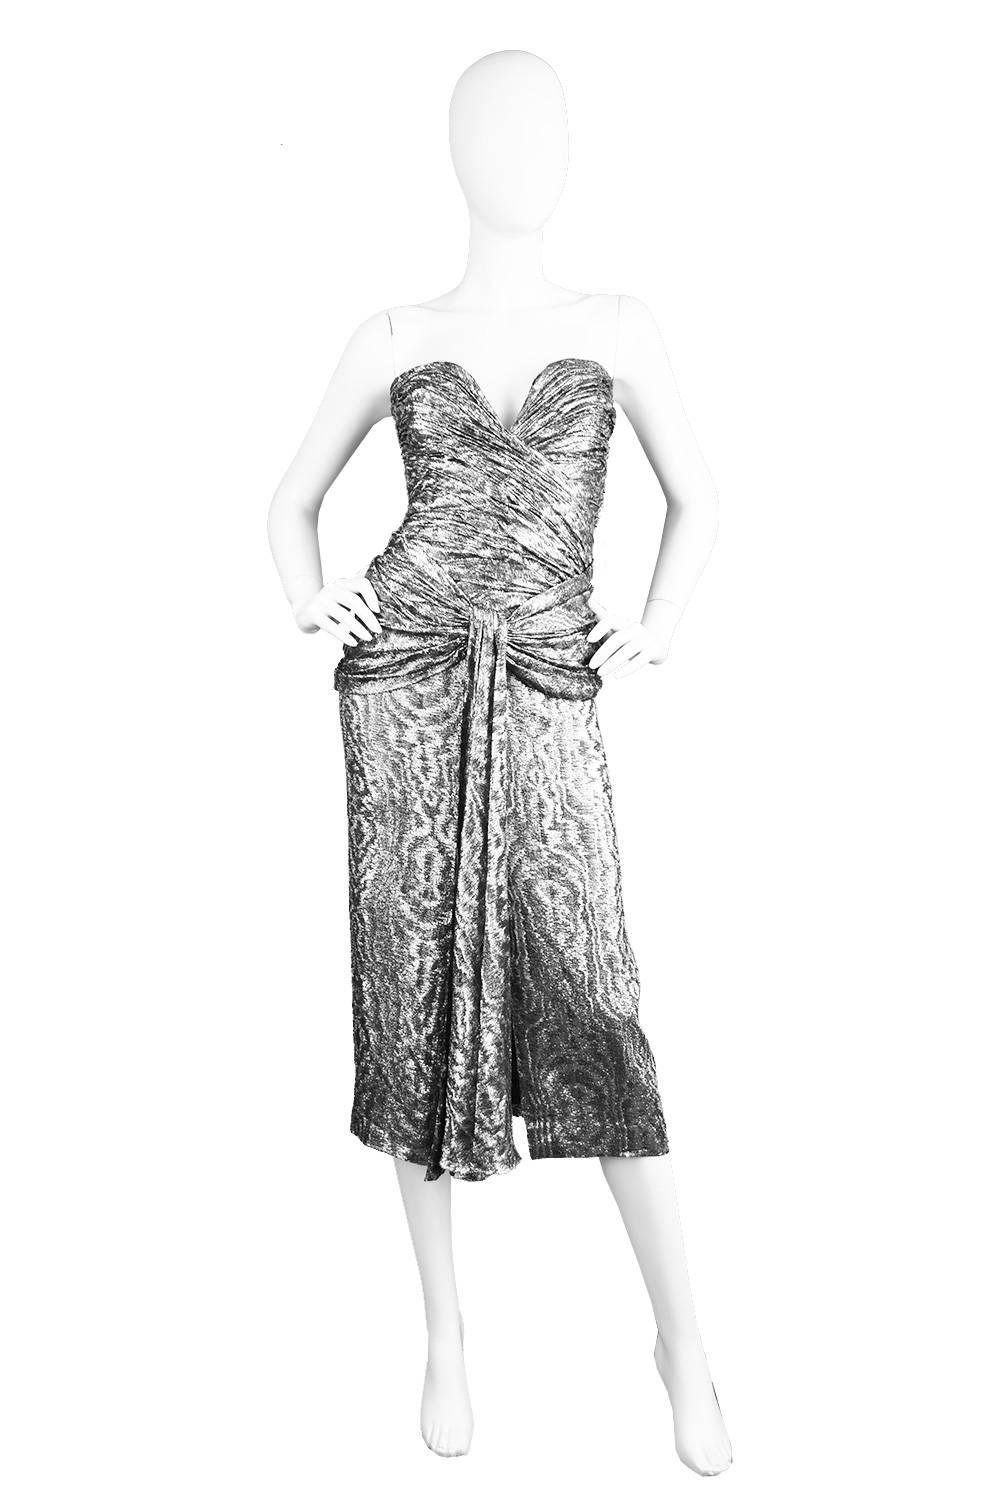 An incredibly sexy and elegant vintage Vicky Tiel dress from the 1980s in a silver lame fabric. 

Estimated Size: UK 6/ US 2/ EU 34 
Bust - 32” / 81cm
Waist - 24” / 61cm
Hips - Up to 36” / 91cm
Length (Bust to Hem) - 38” / 96cm

This stunning